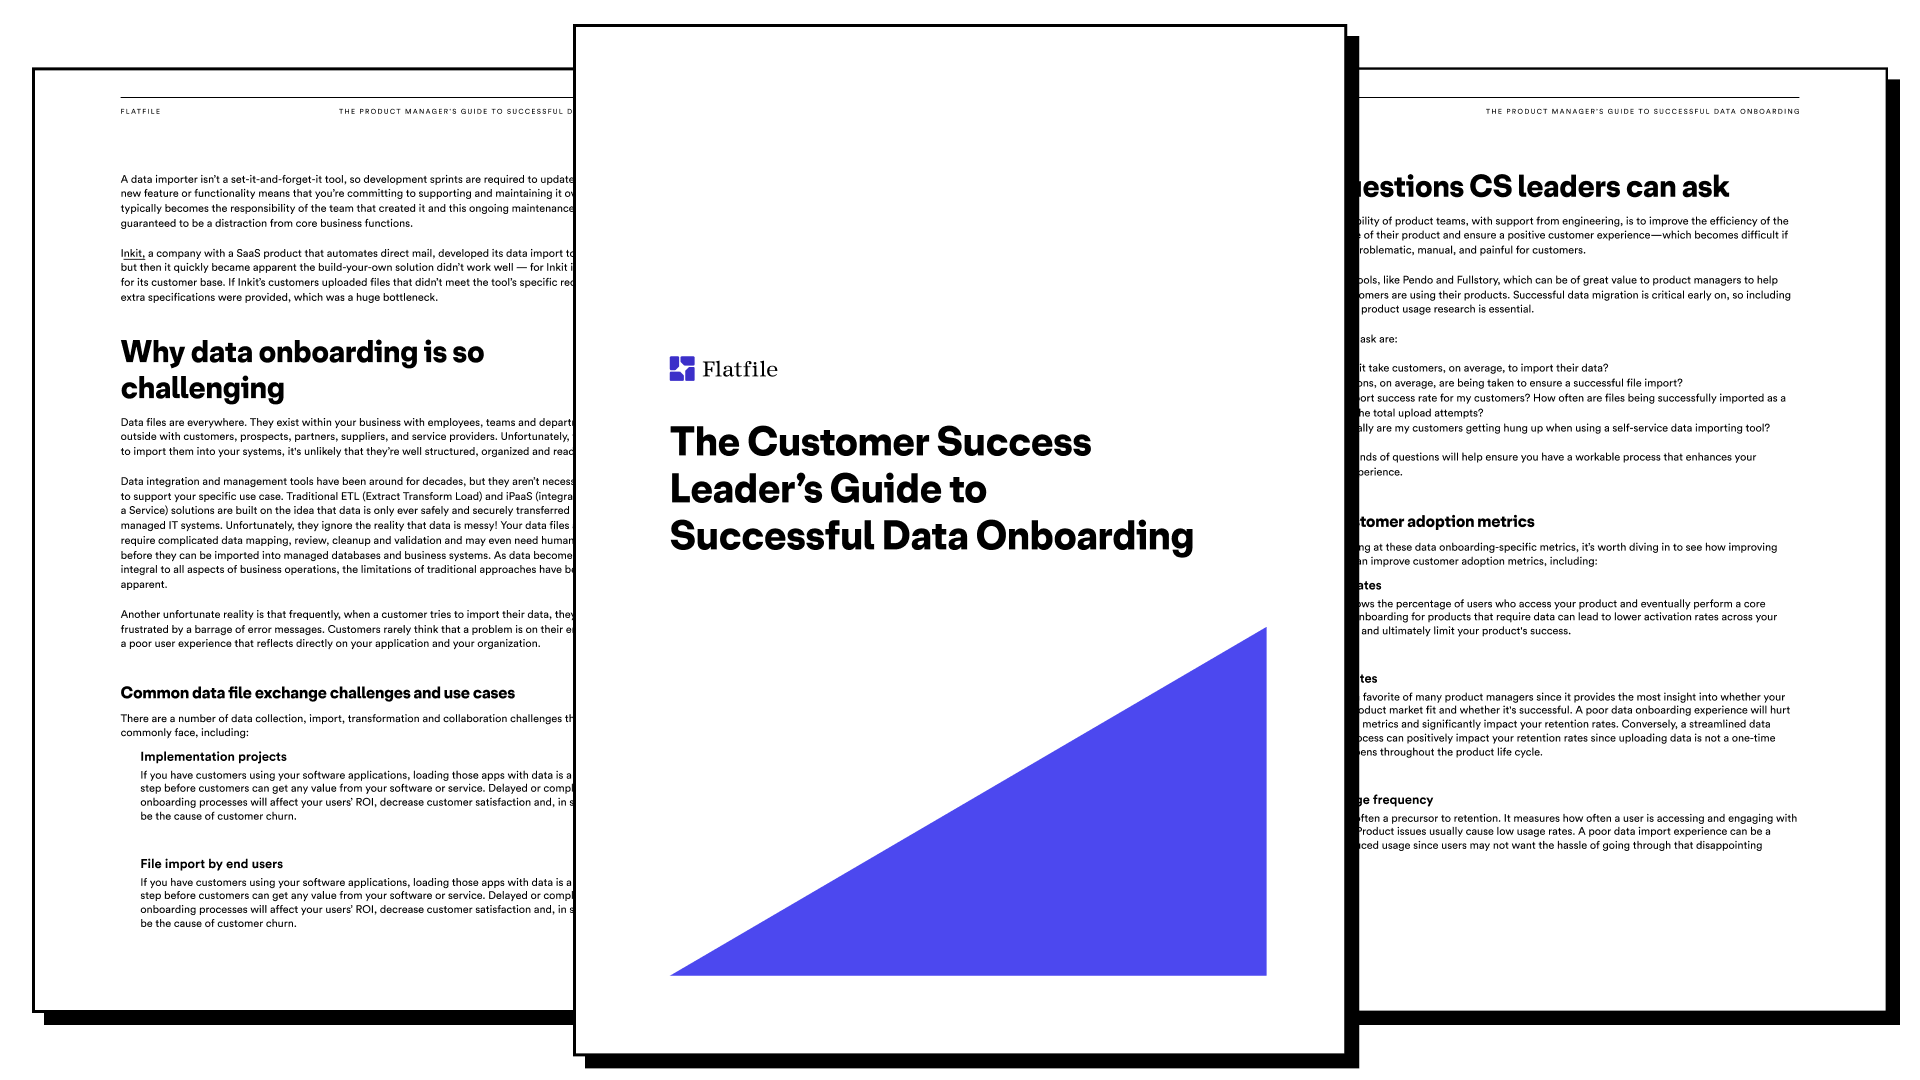 The Customer Success Leader’s Guide to Successful Data Onboarding